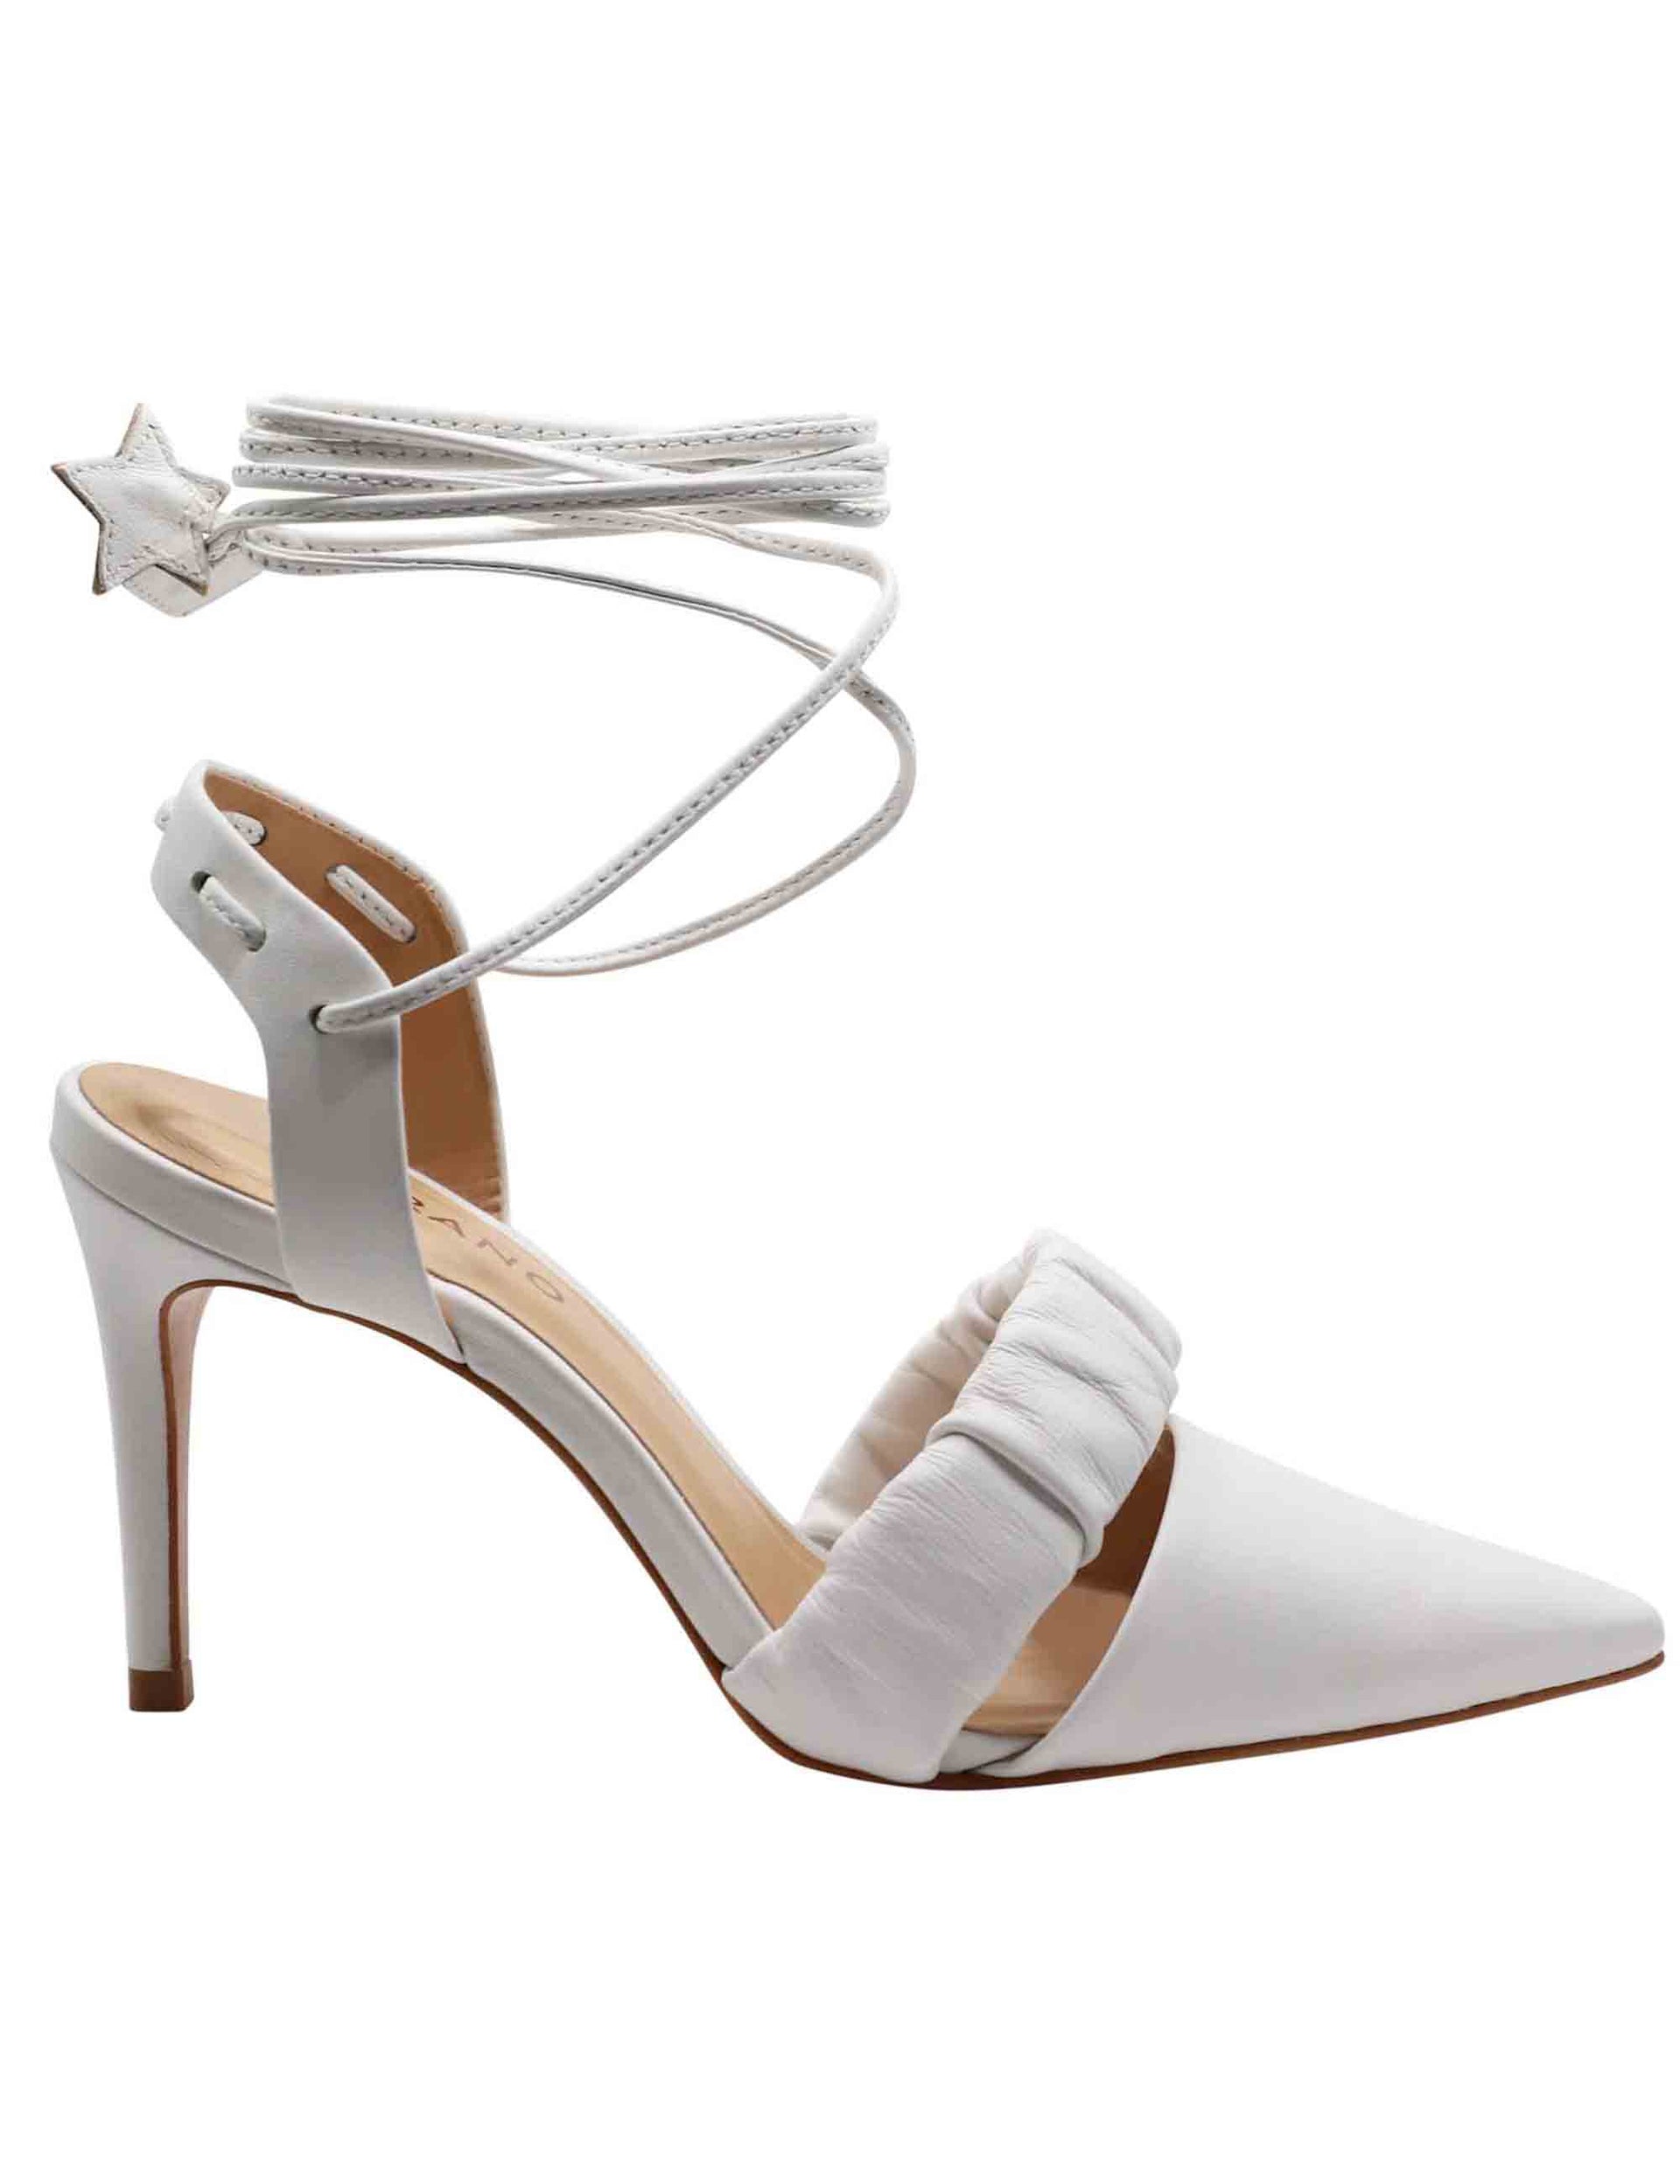 Women's slingback pumps in white leather with ankle straps and high heel